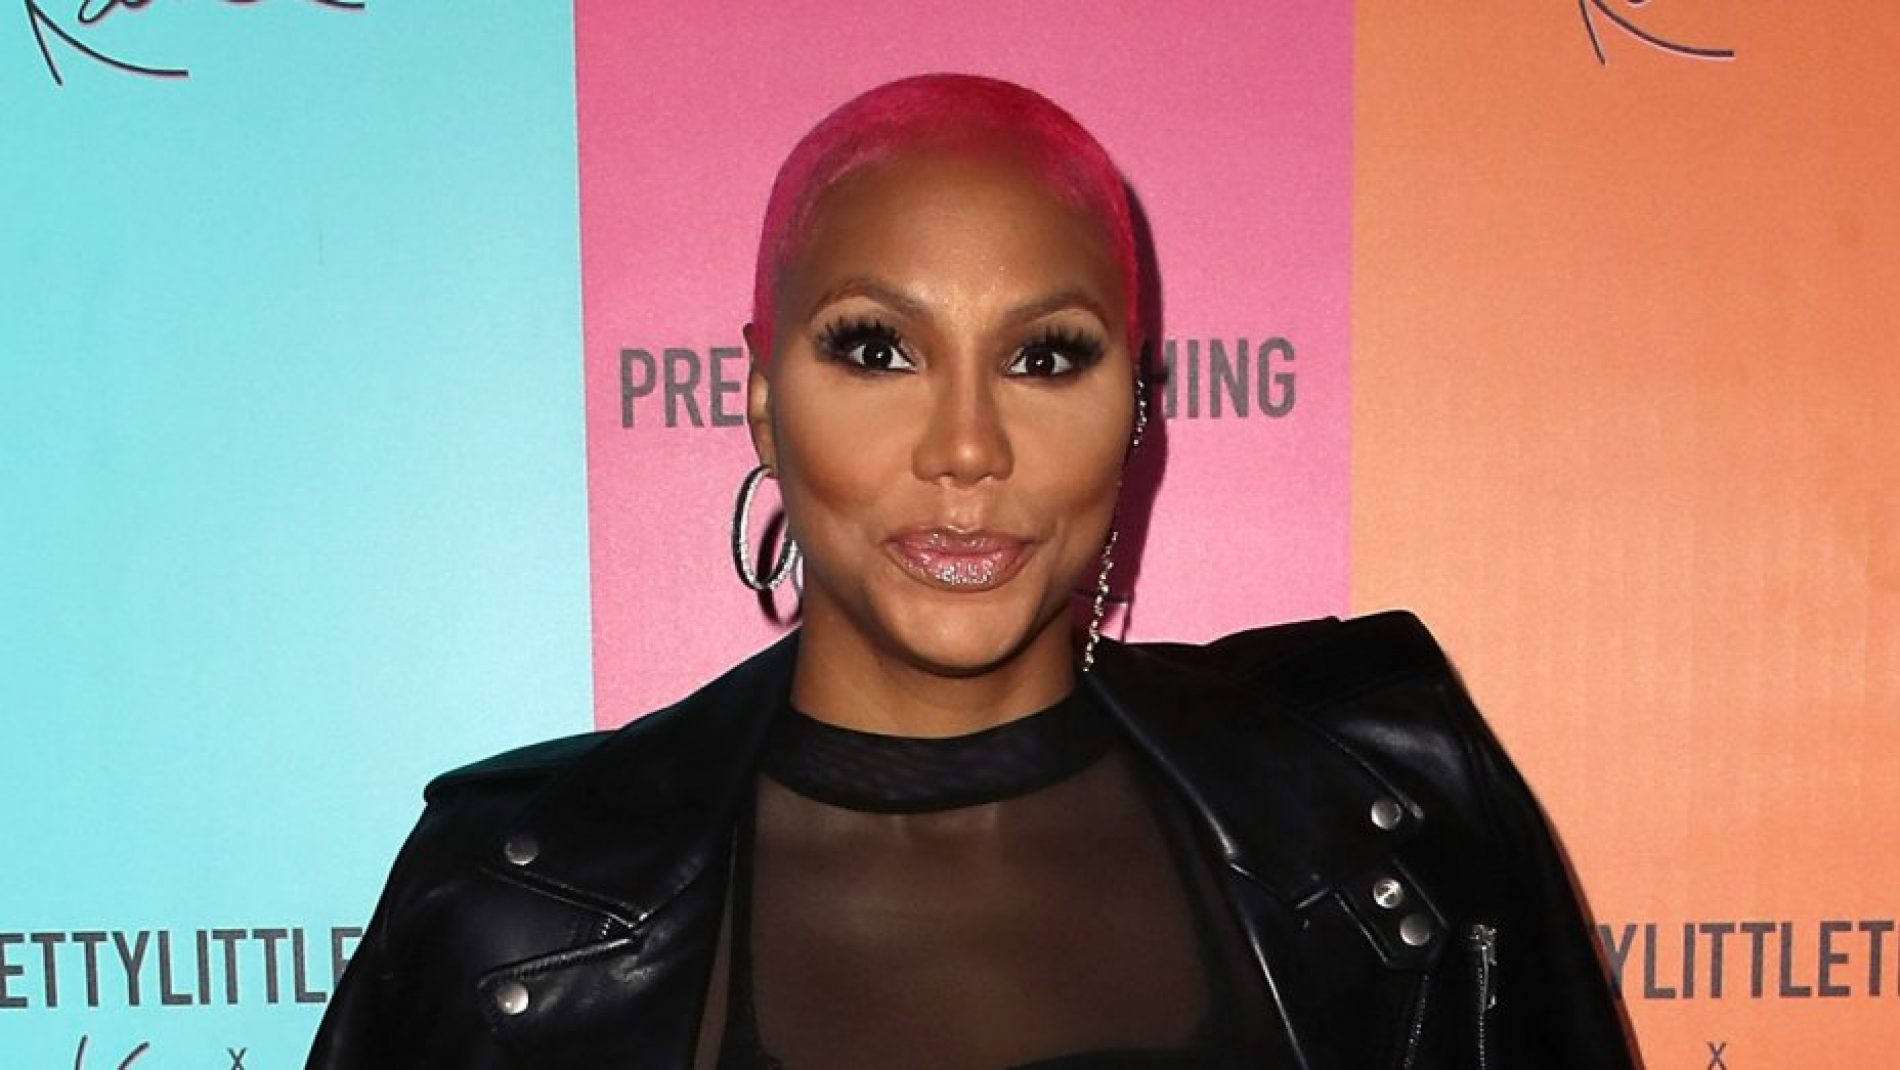 Tamar Braxton tells Women that if a Man “Lays With You” and “He Don’t Touch You”, He’s Gay